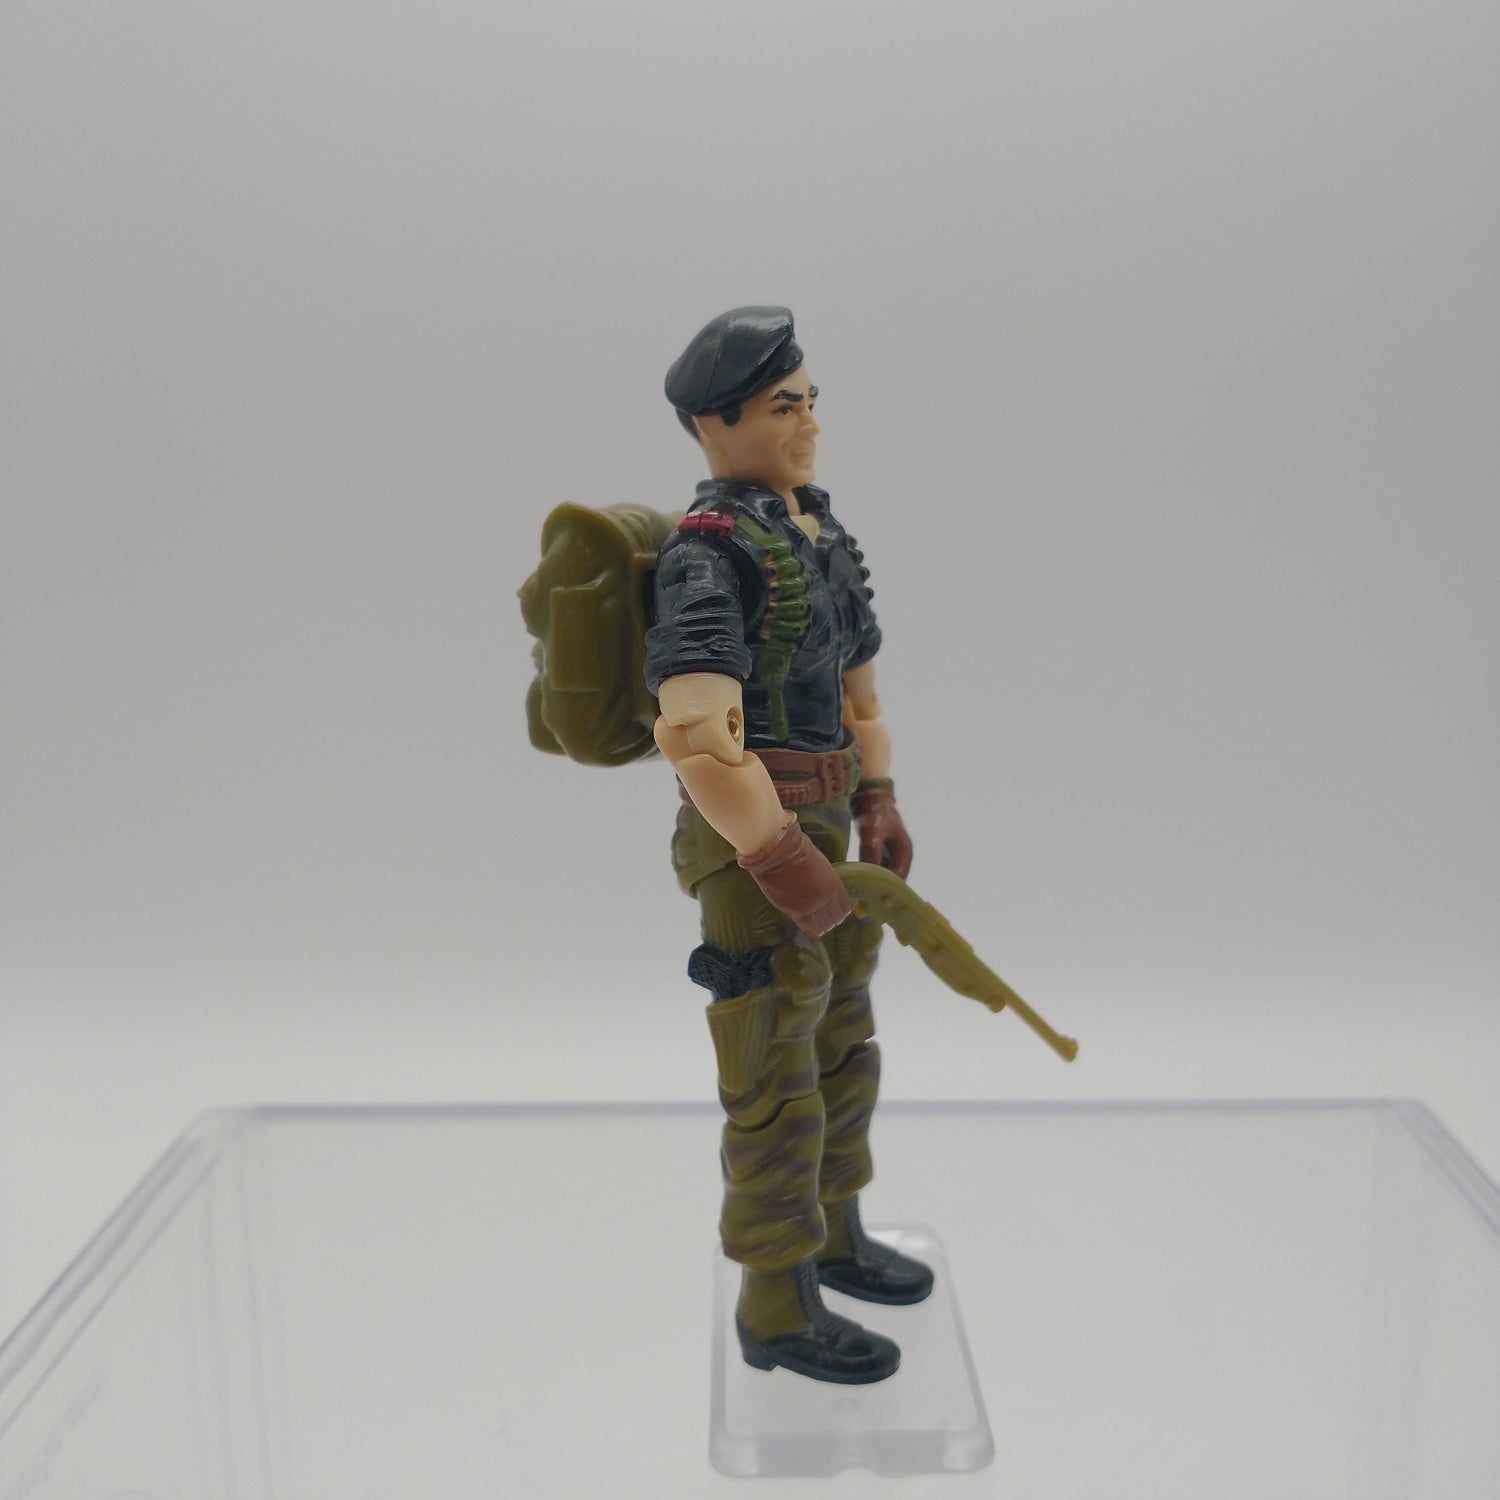 The action figure from the right side